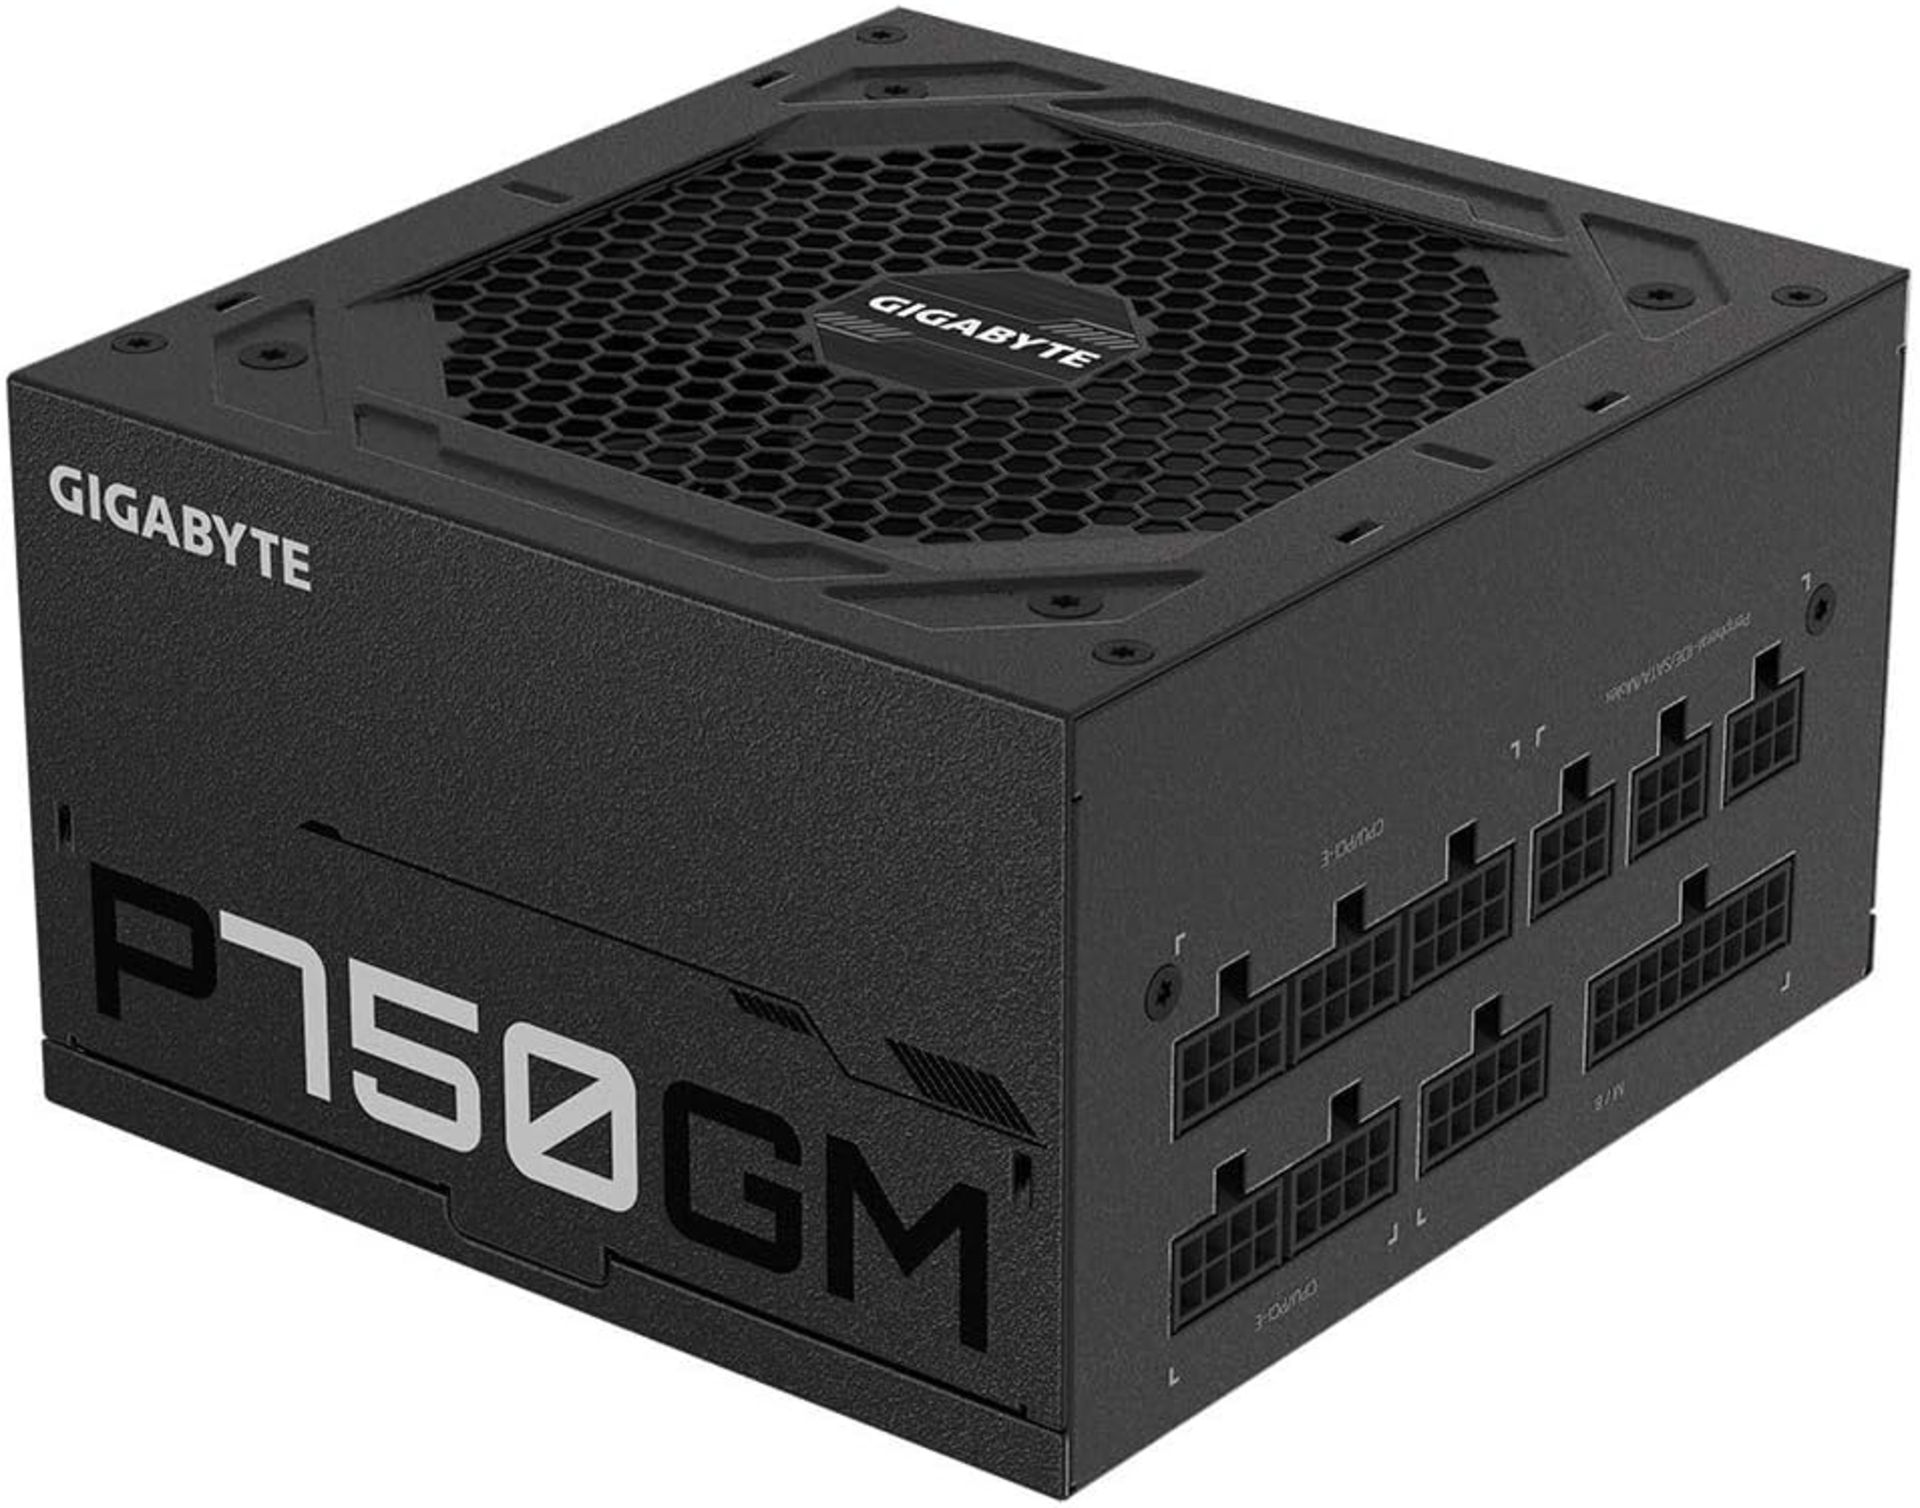 BRAND NEW FACTORY SEALED GIGABYTE P750GM 750w 80 Plus Gold Fully Modular Power Supply. RRP £84.99. - Image 3 of 6